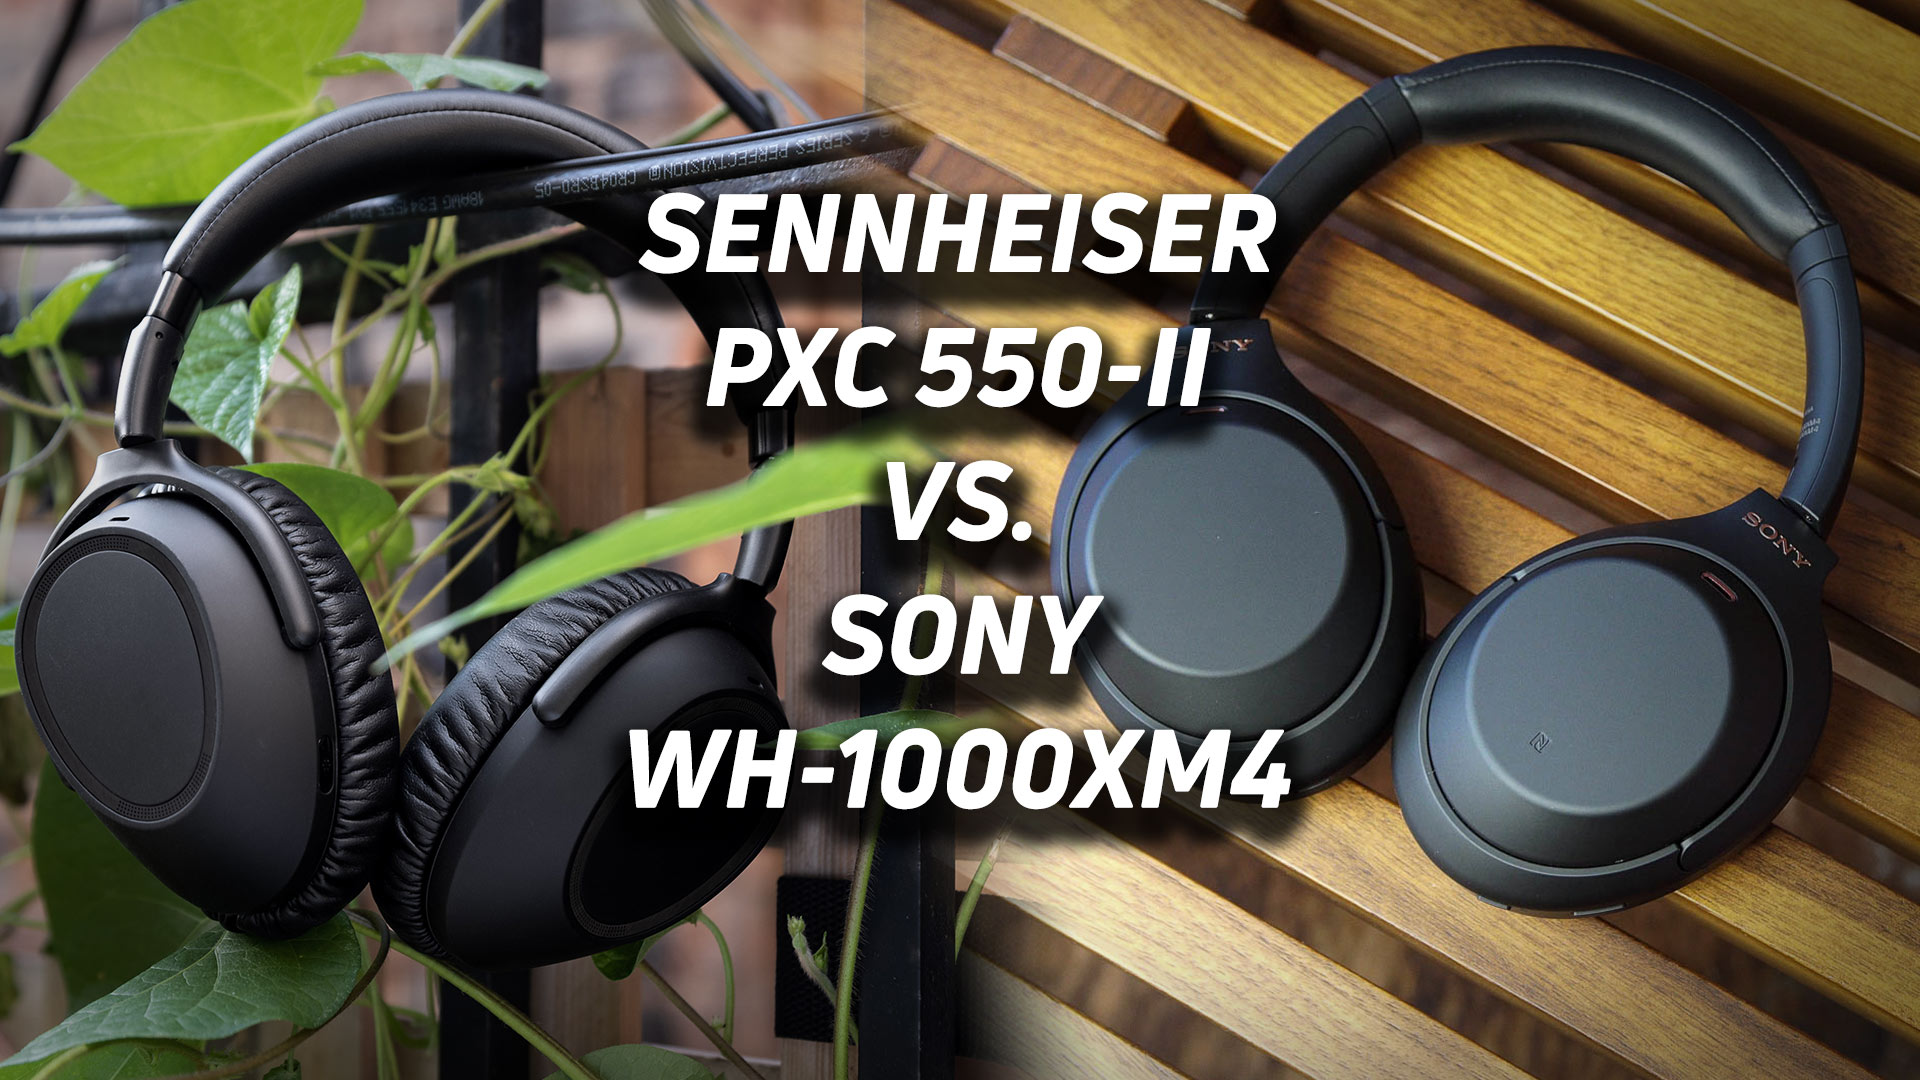 A blended image of the Sennheiser PXC 550-II vs Sony WH-1000XM4 with the respective text overlaid atop it.